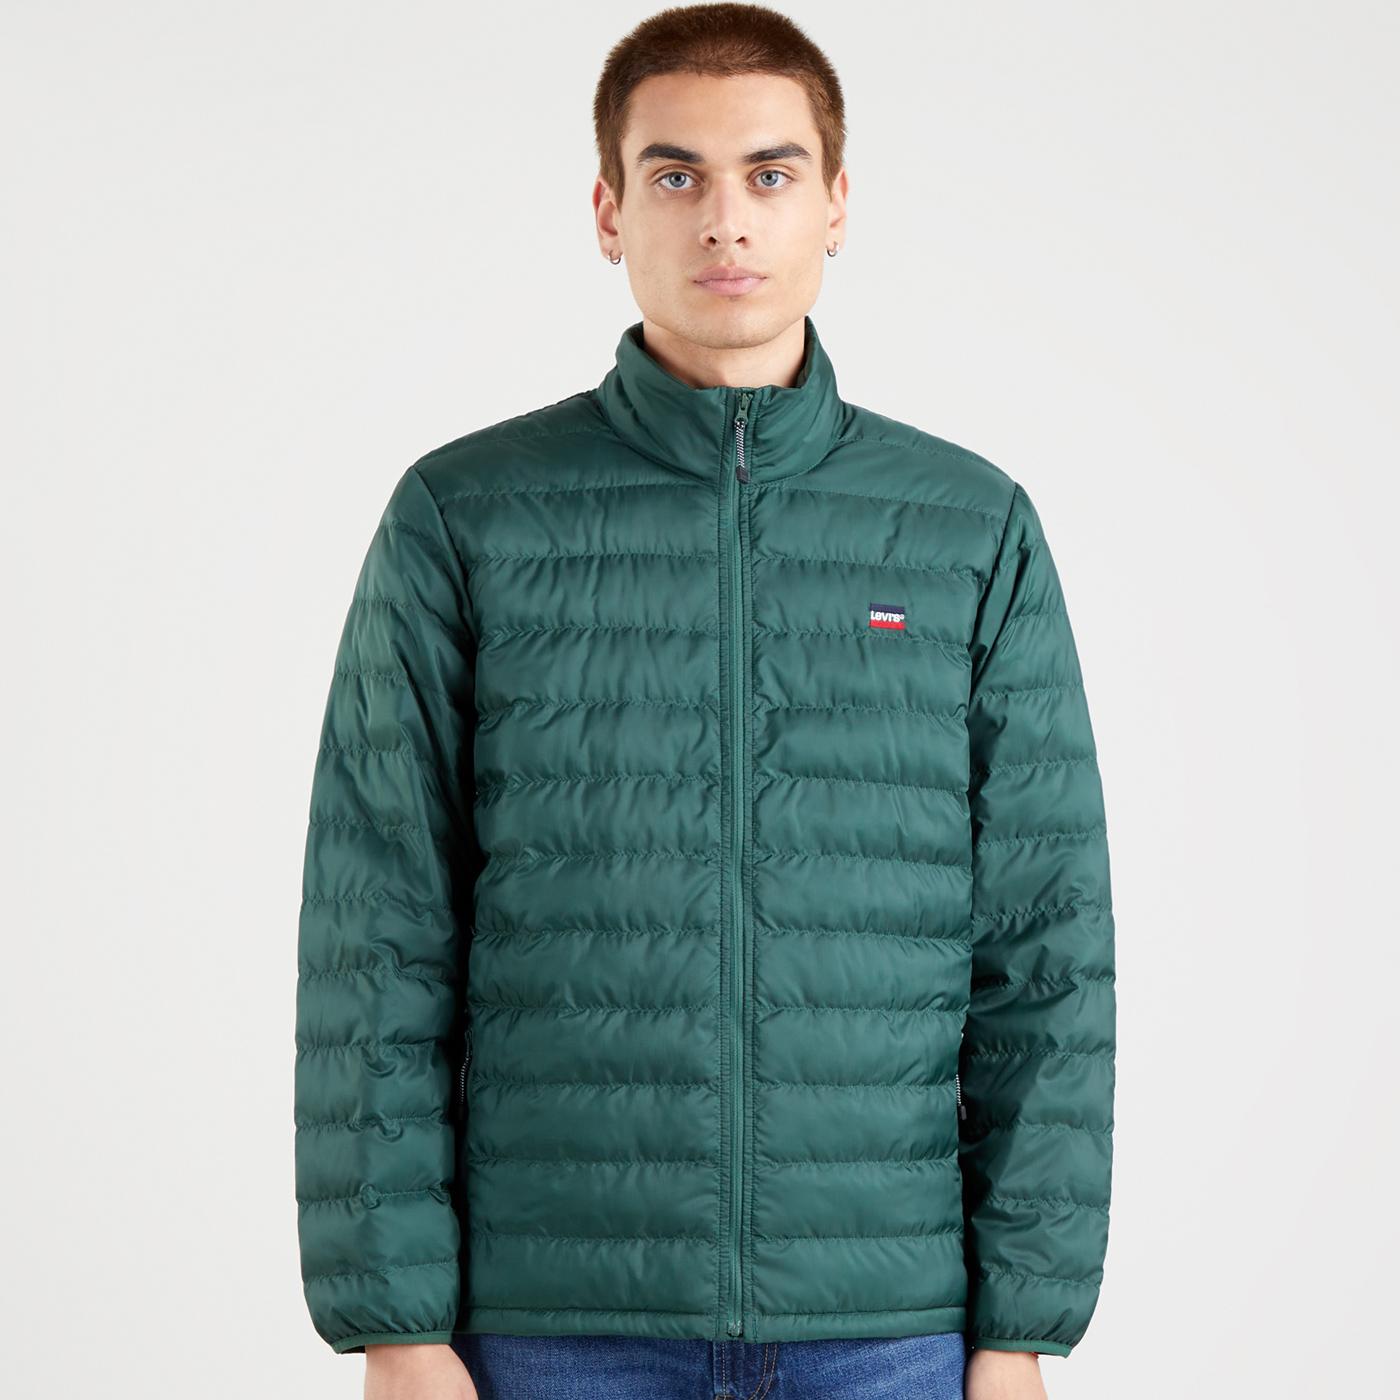 Presidio LEVI'S Retro Packable Quilted Jacket in Pineneedle